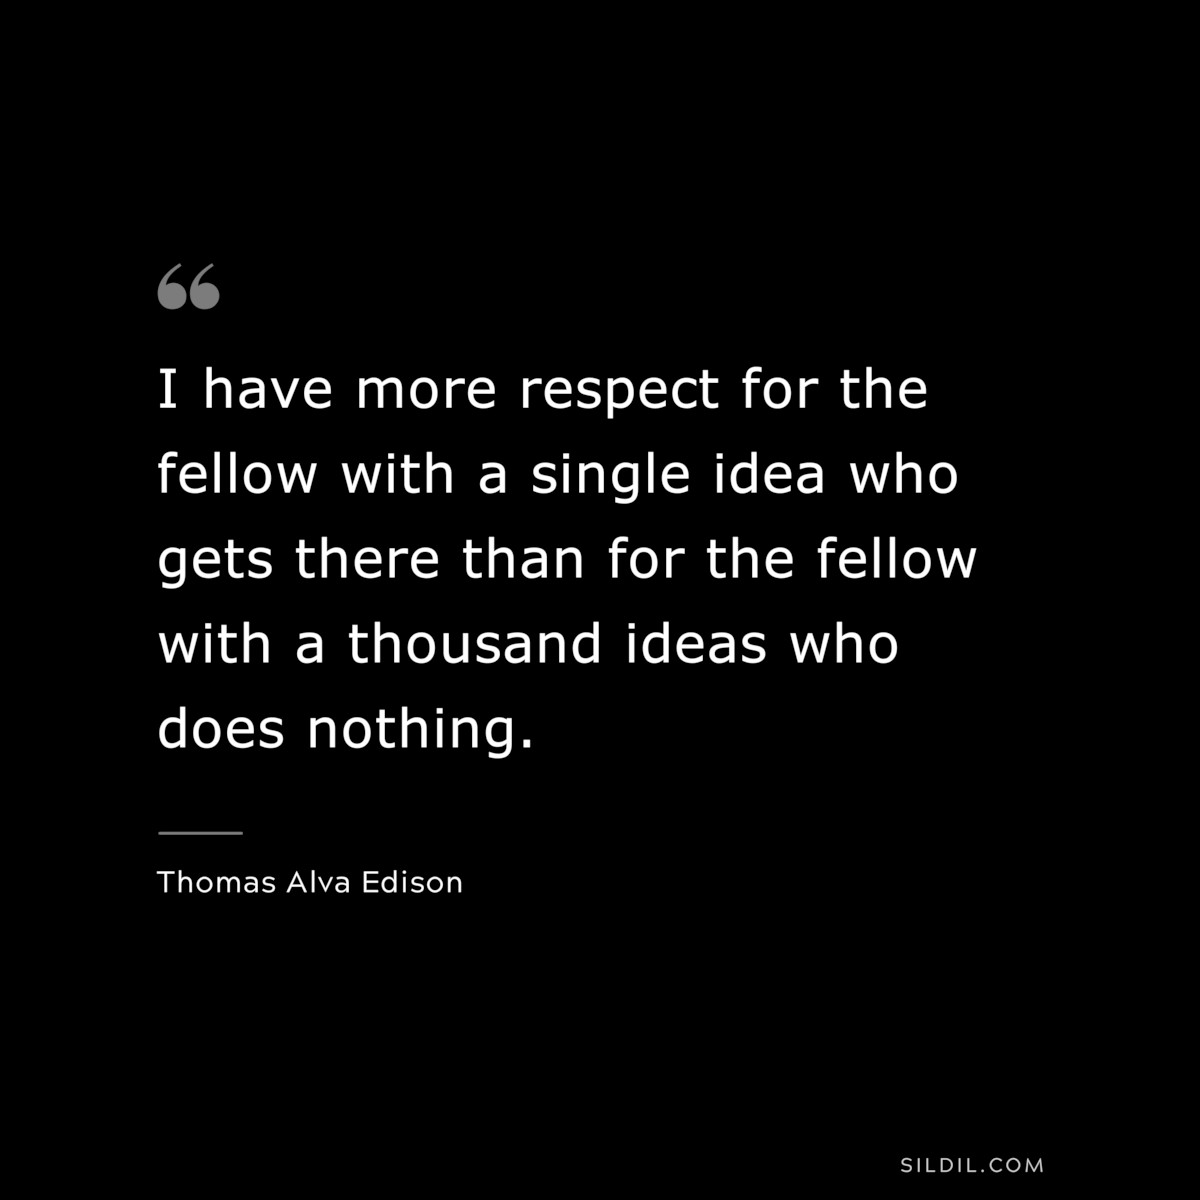 I have more respect for the fellow with a single idea who gets there than for the fellow with a thousand ideas who does nothing. ― Thomas Alva Edison